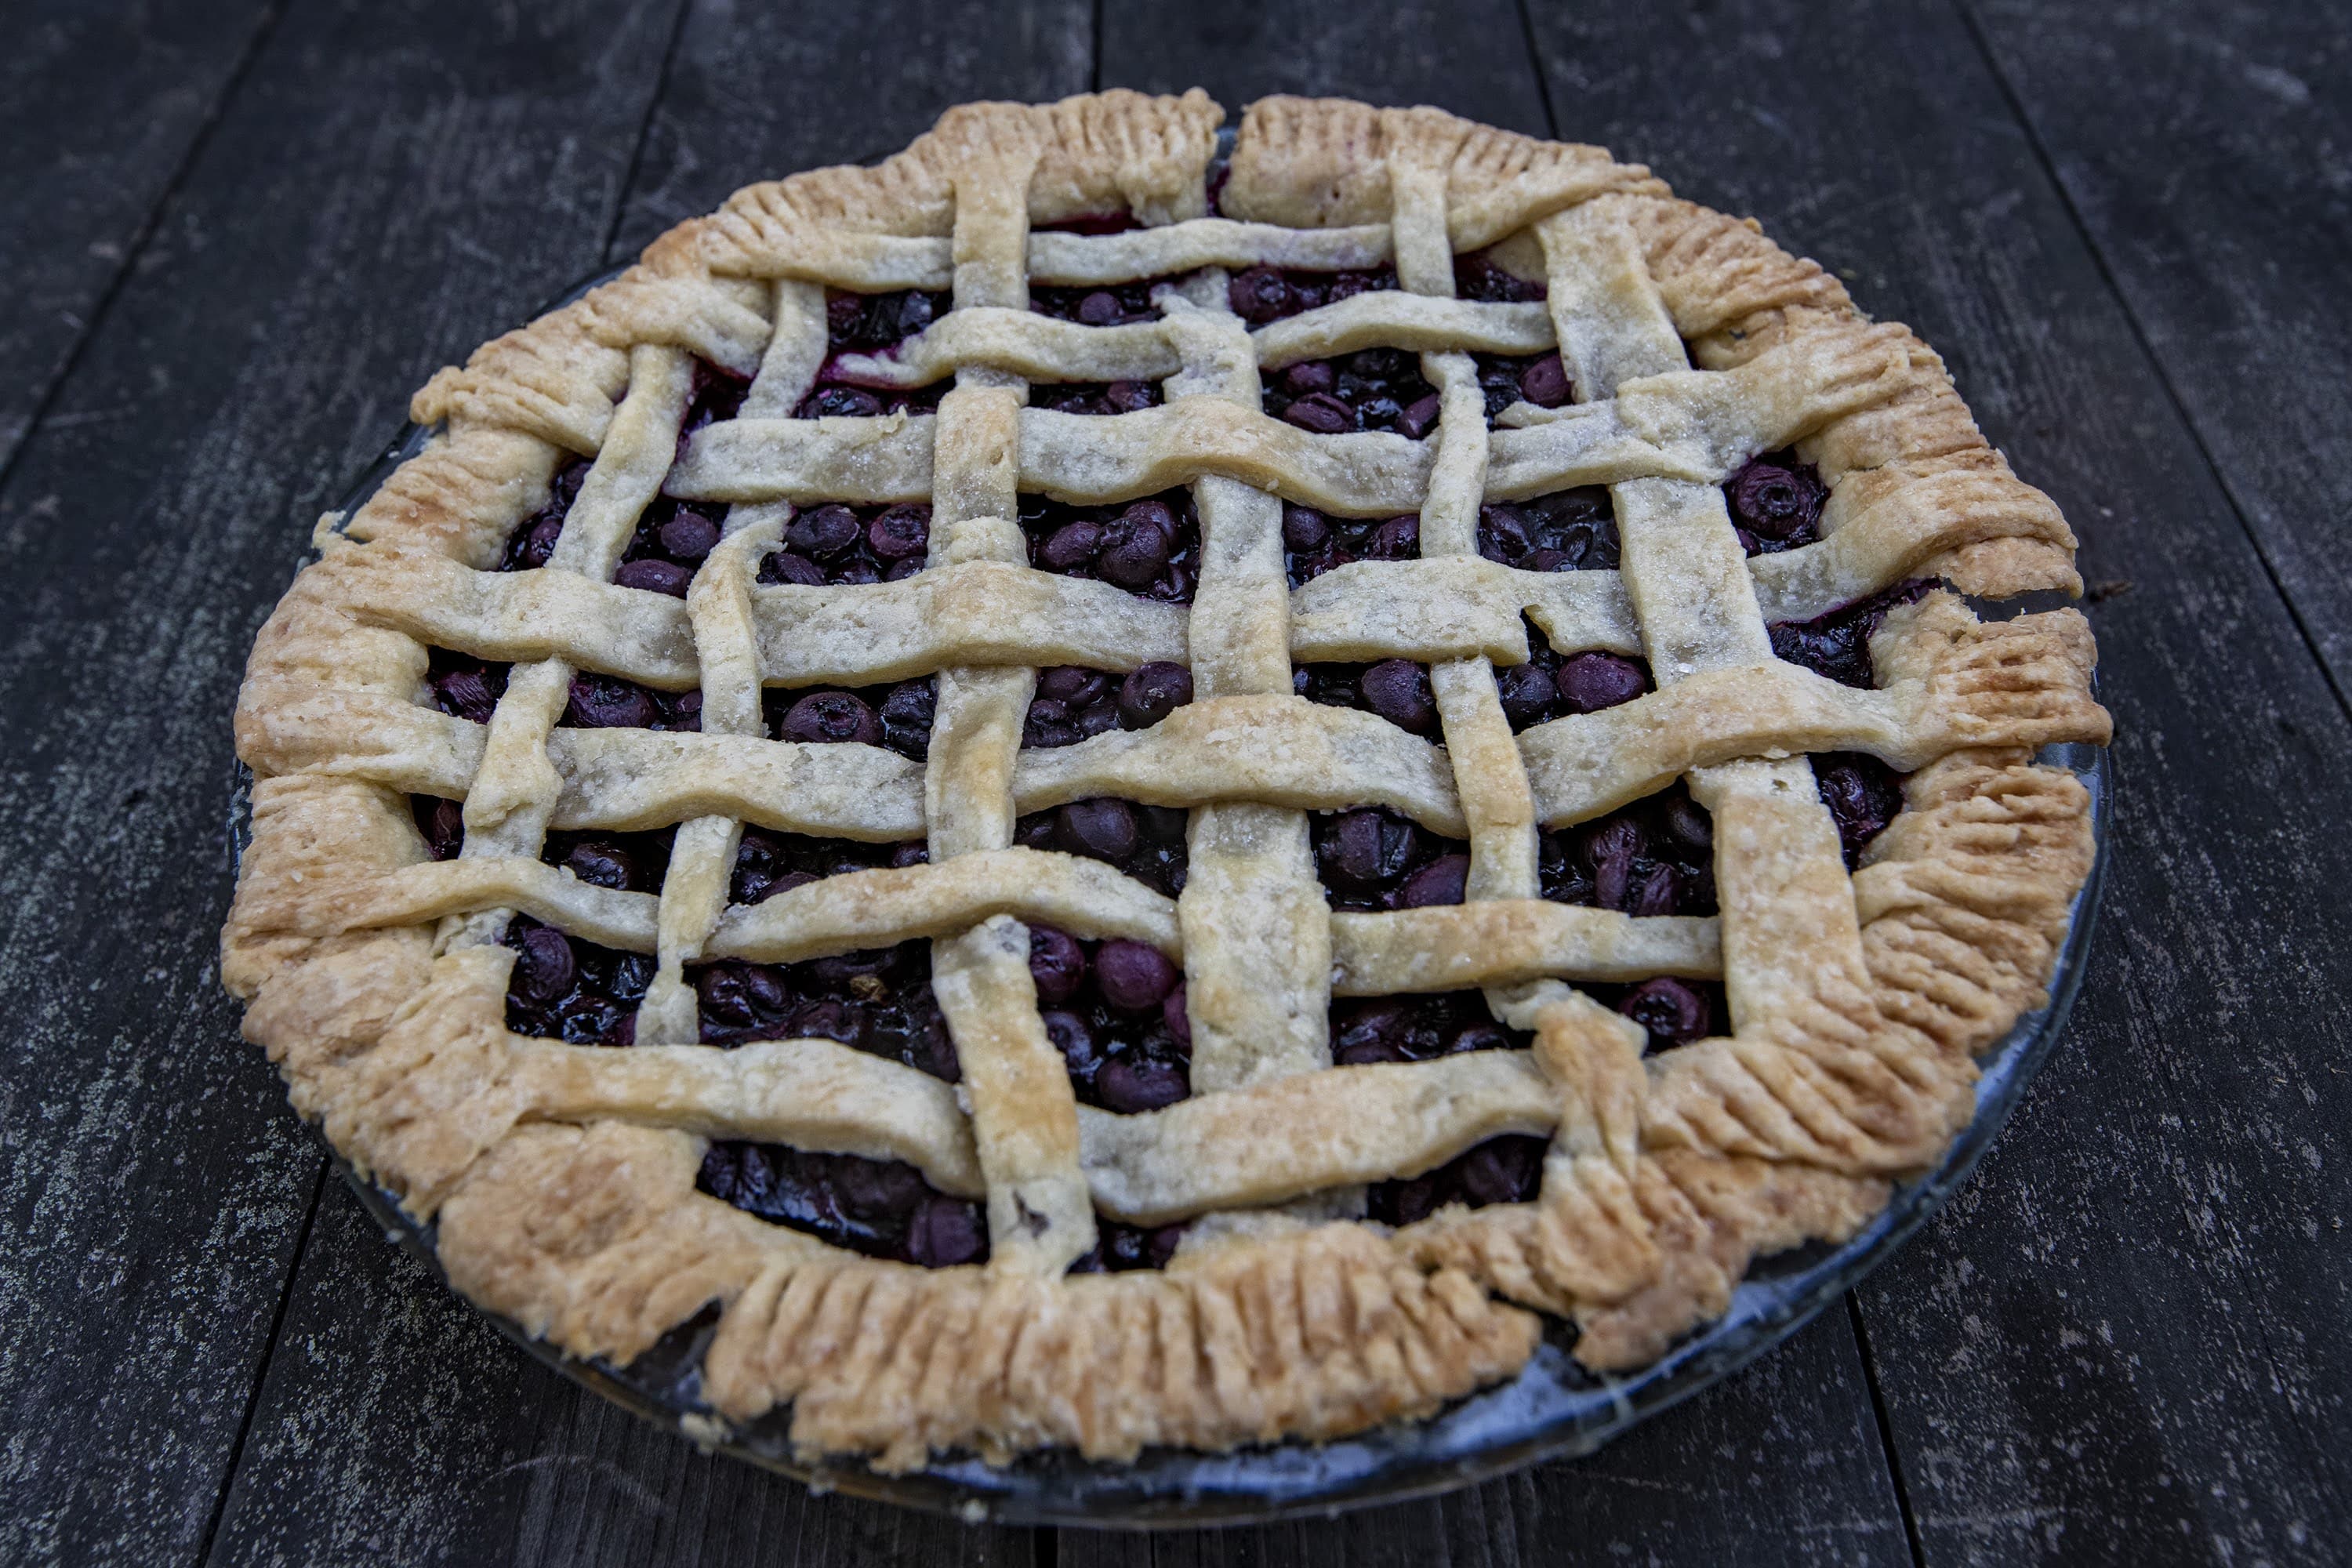 A blueberry pie made with blueberries from Honey Pot Hill Orchards in Stow. (Jesse Costa/WBUR)